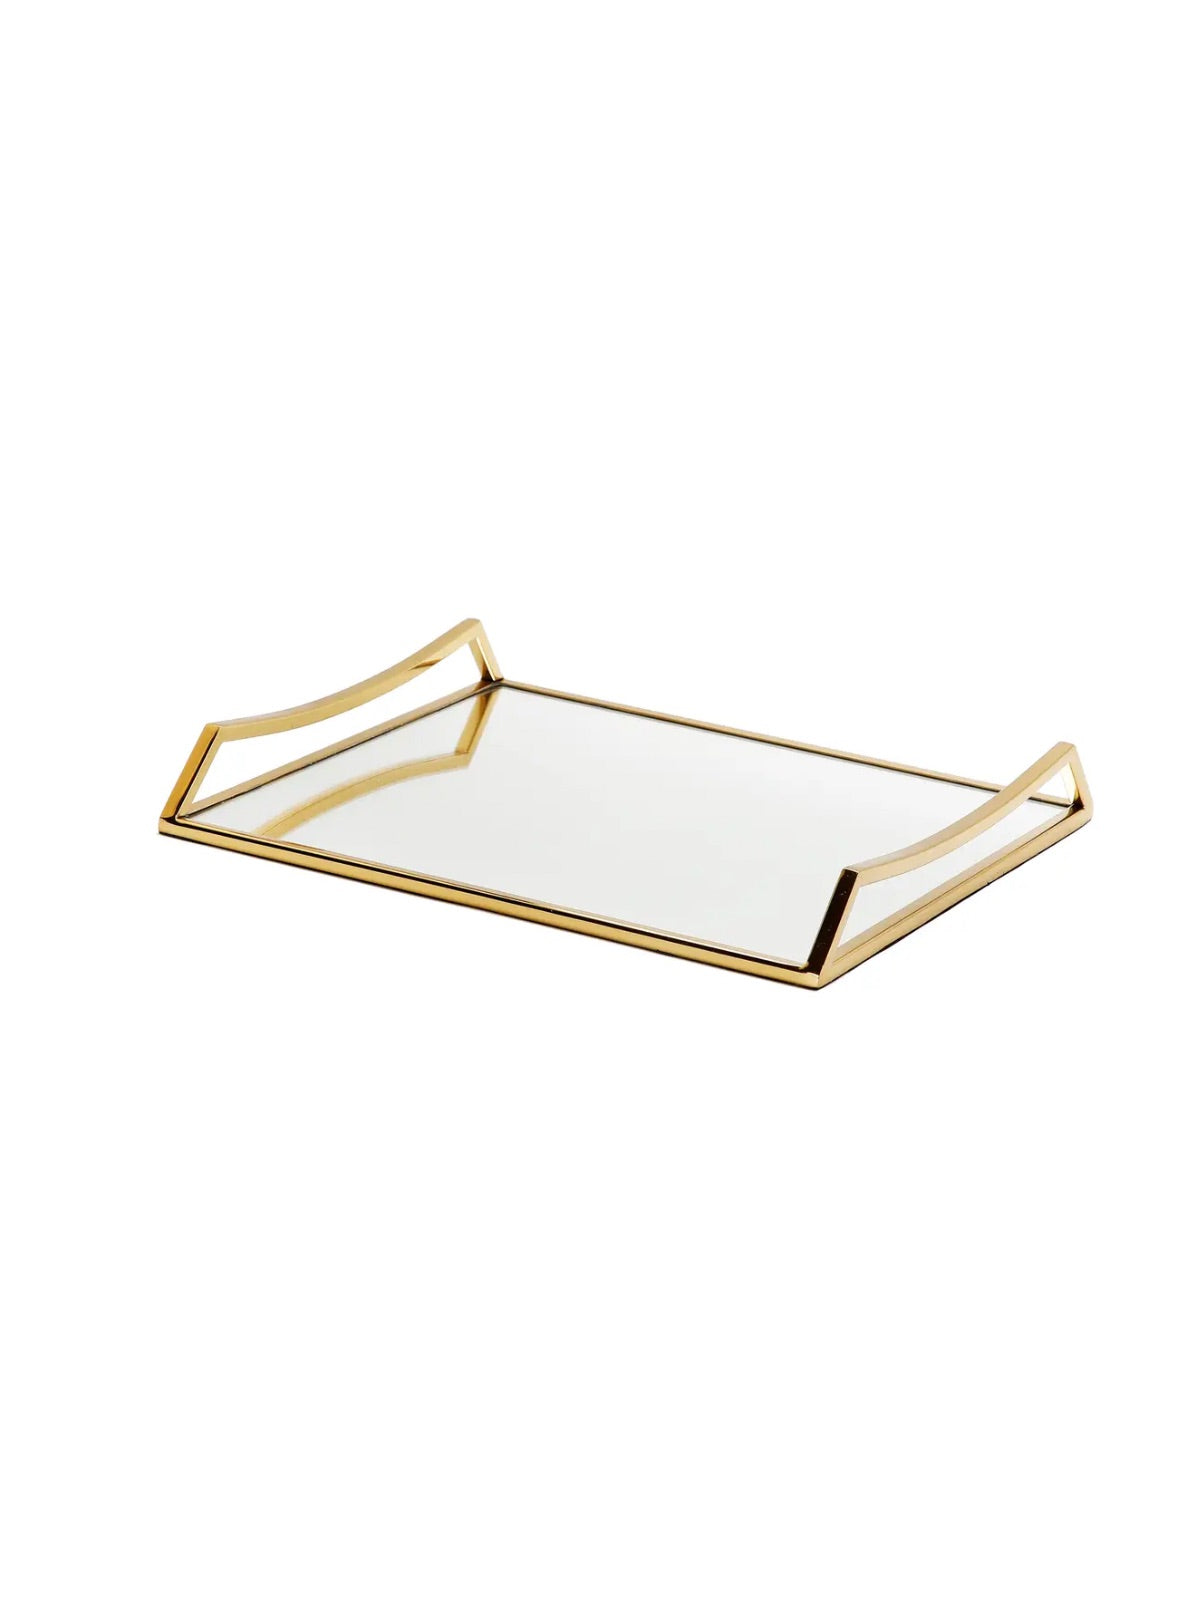 16L inches Oblong Mirror Serving Tray with Gold Handles Sold by KYA Home Decor.